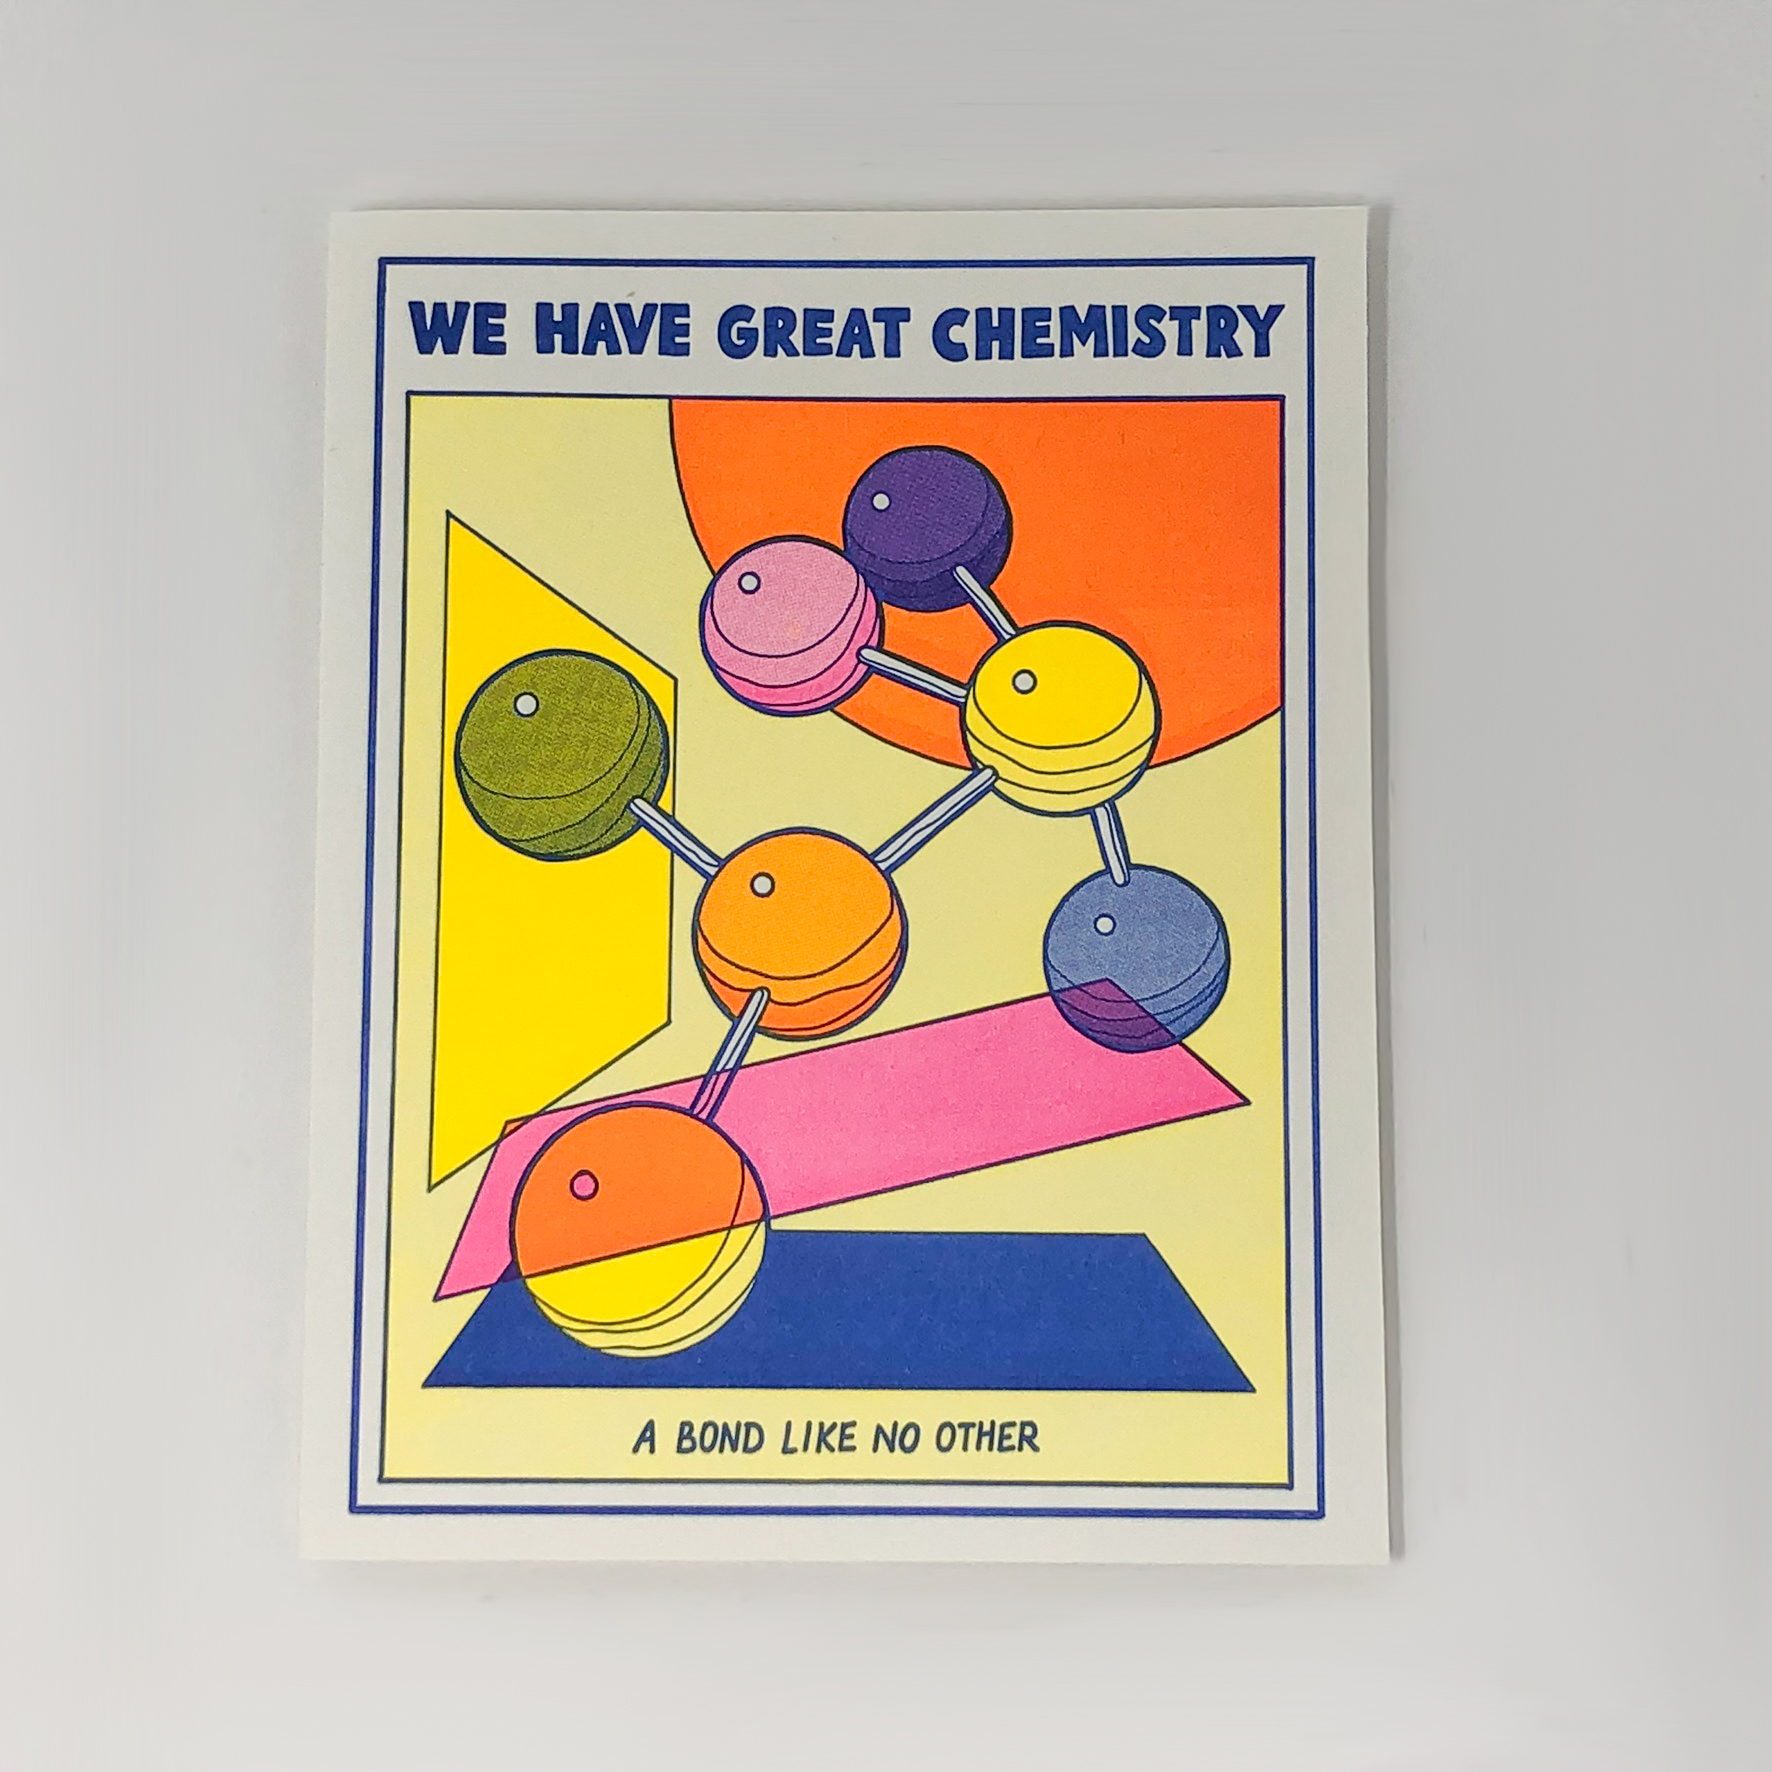 Chemistry-themed greeting card